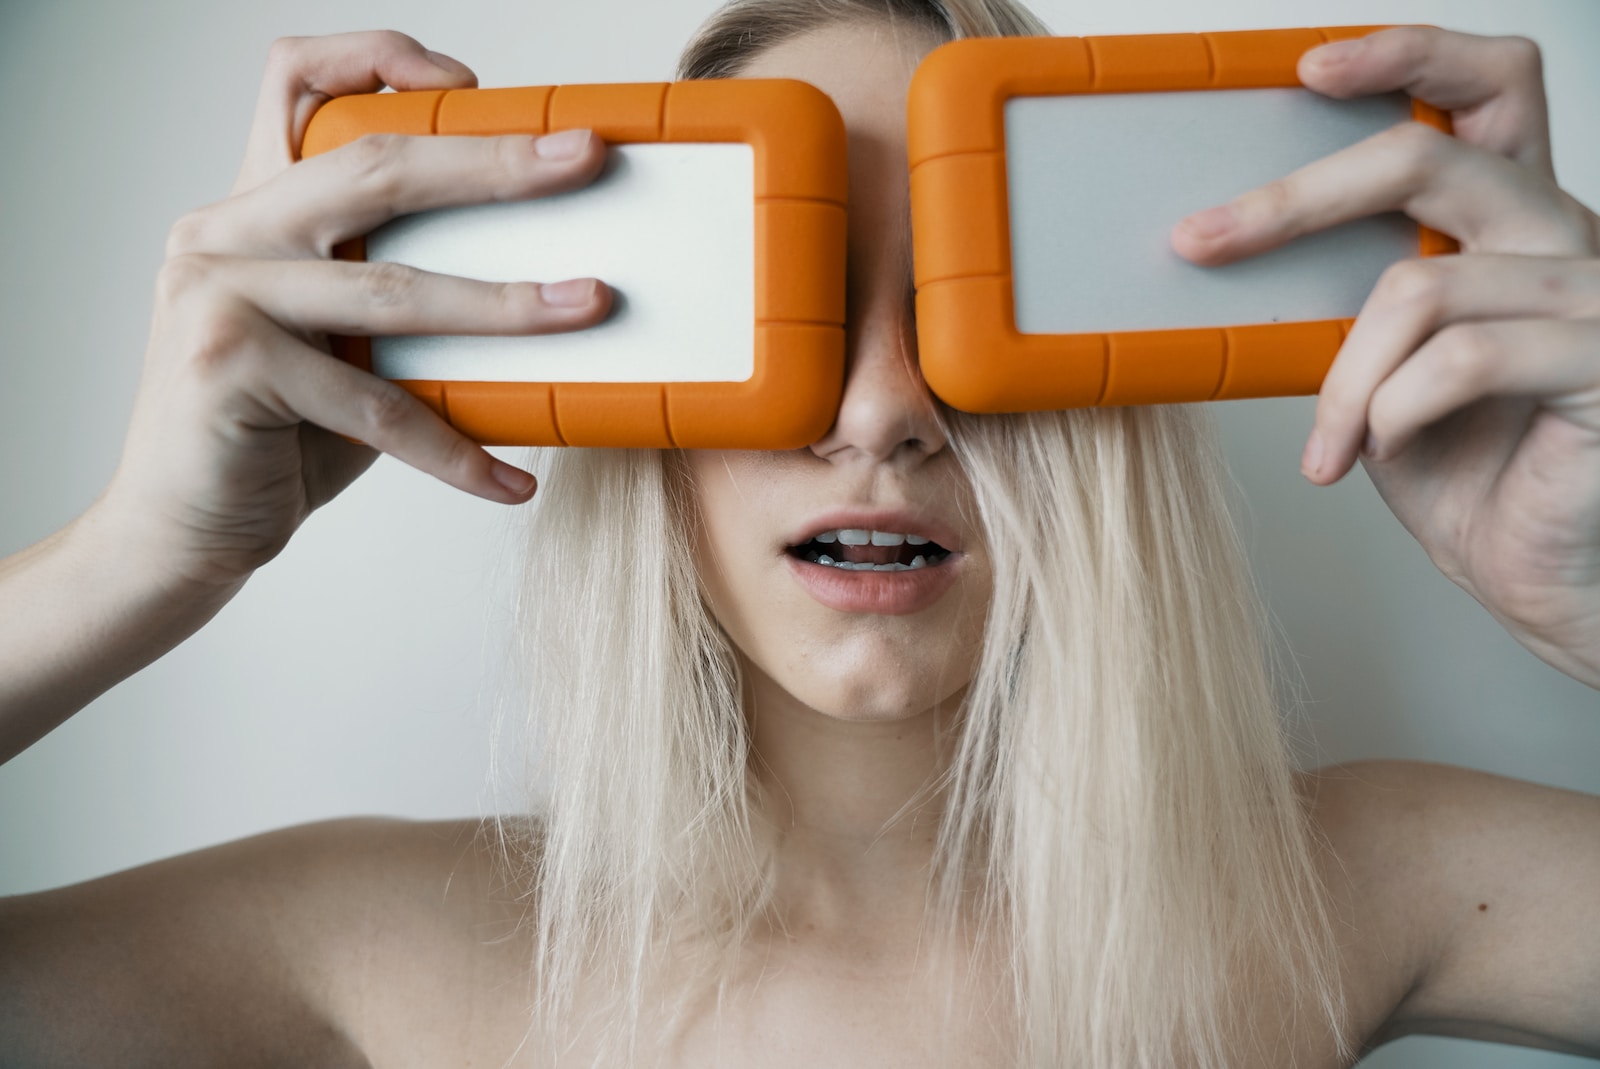 Hard Drives woman holding two white-and-orange plastic cases